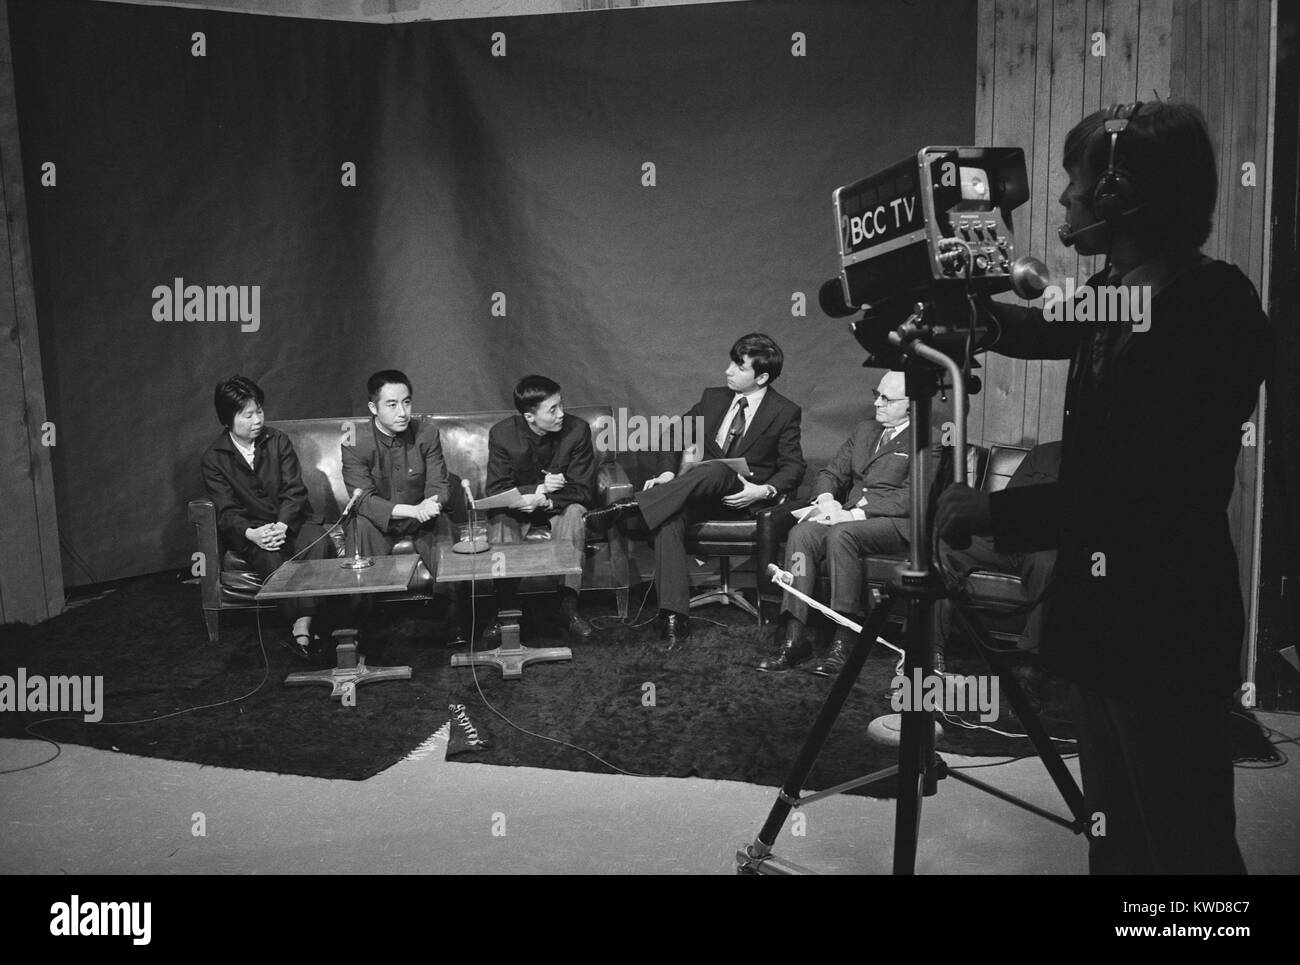 Chinese National Table Tennis Team at a television studio at Bethesda-Chevy Chase High School. March 17, 1972. 'Ping Pong Diplomacy' grew out of the exchange of table tennis players between the U.S. and People's Republic of China. (BSLOC 2015 17 236) Stock Photo